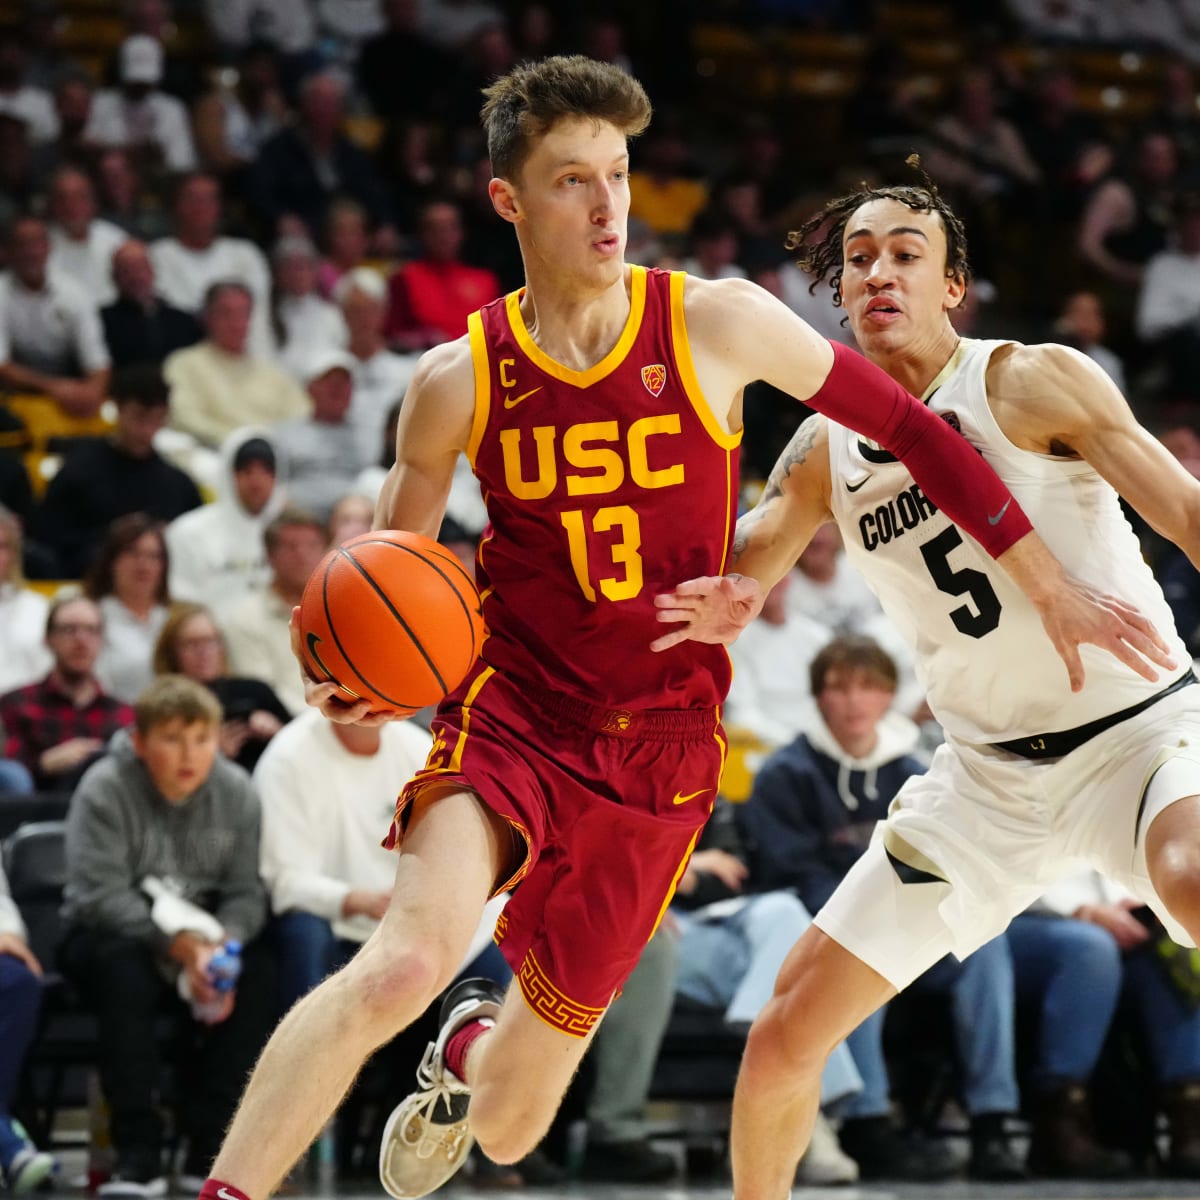 USC Basketball How To Watch Drew Petersons Summer League Heat Bout On Friday Night